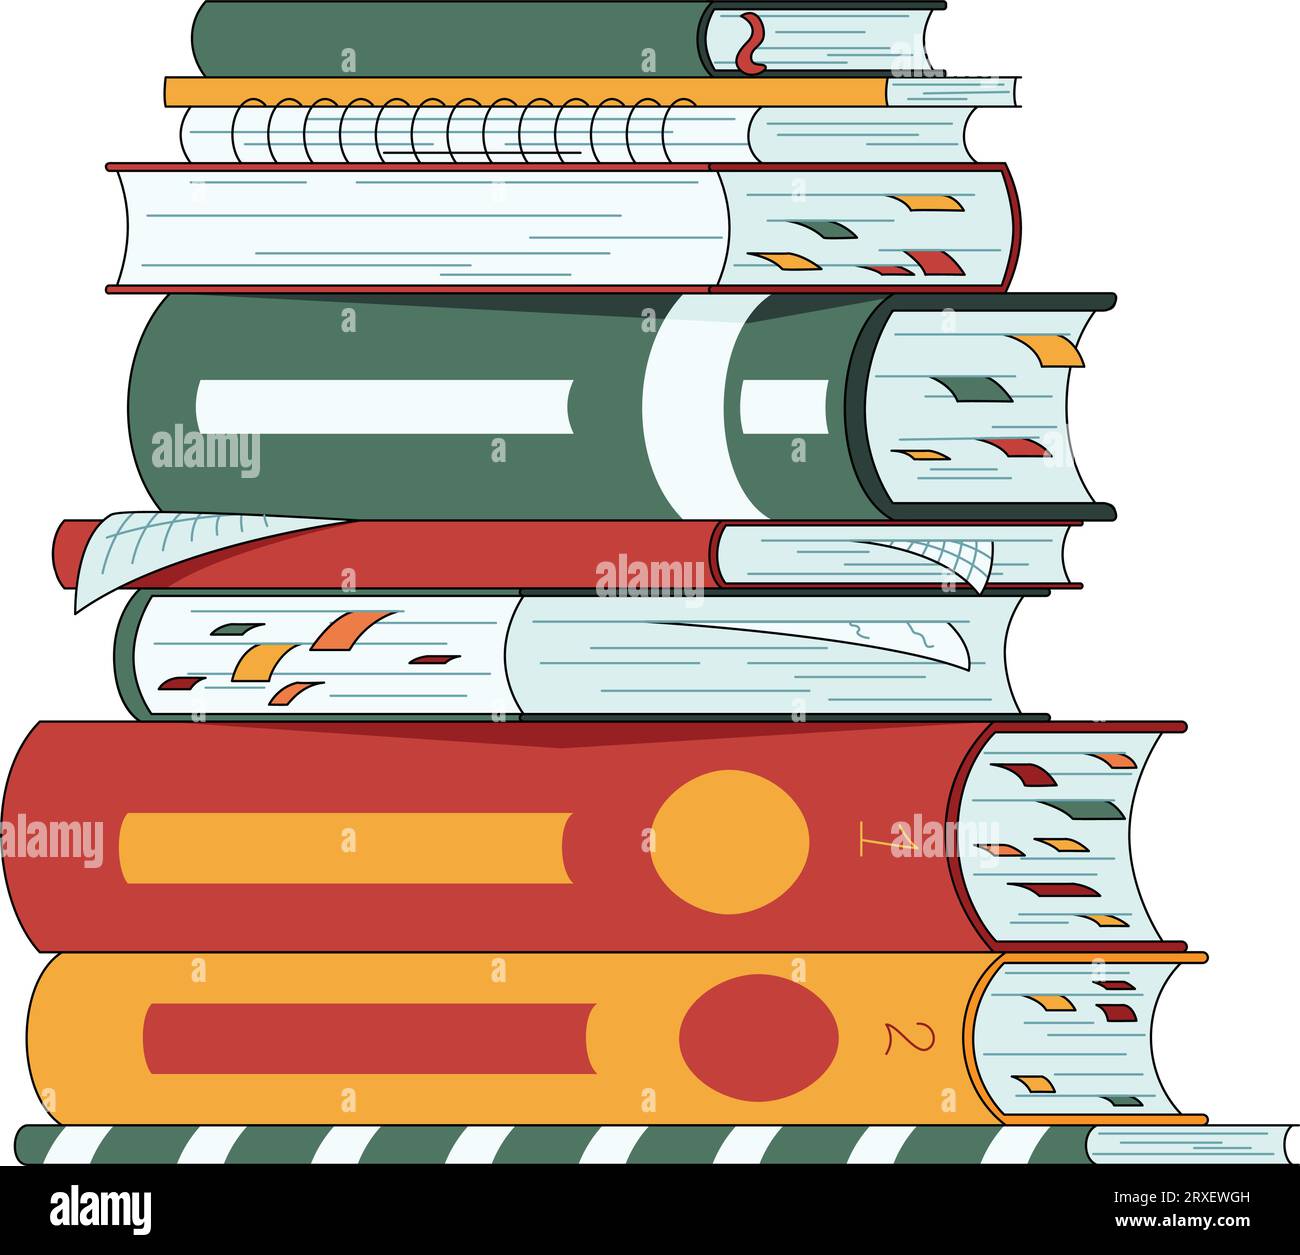 https://c8.alamy.com/comp/2RXEWGH/stack-of-books-textbooks-with-bookmarks-and-notebooks-reading-and-learning-sector-illustration-2RXEWGH.jpg